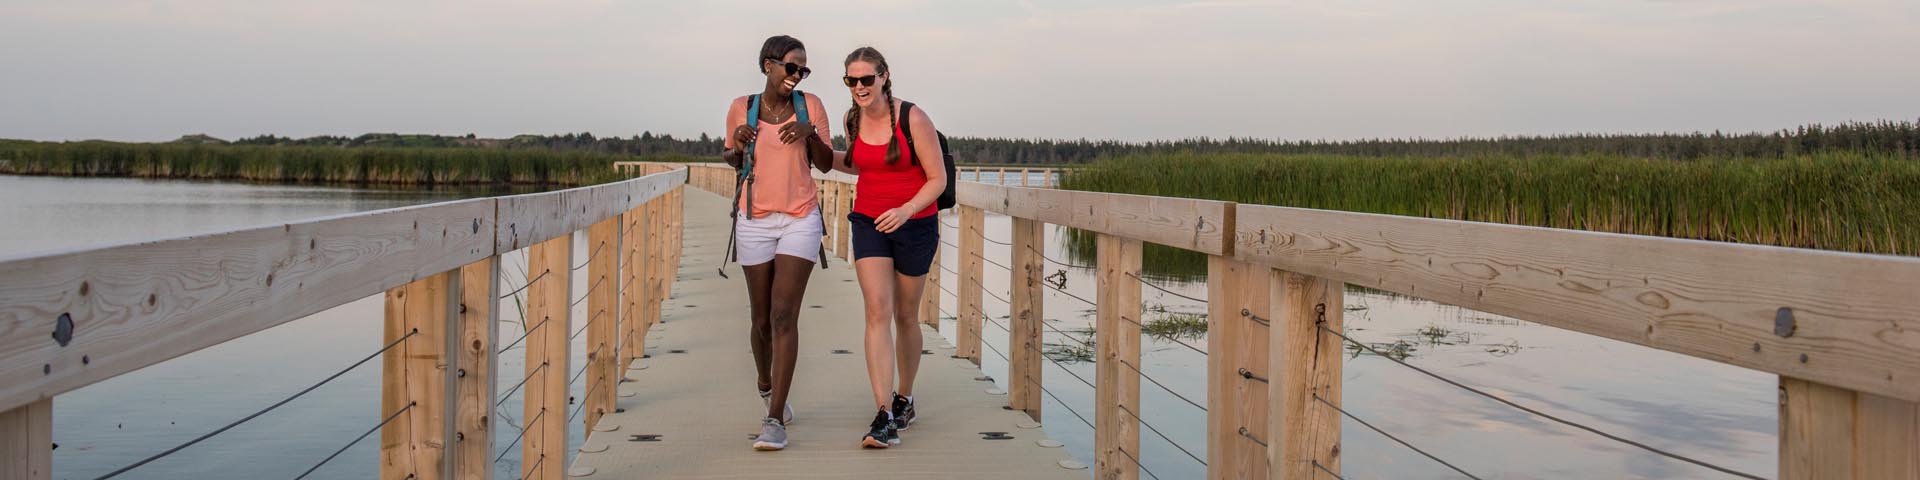 Visitors walking on the floating boardwalk over Bowley Pond on the Greenwich Dunes Trail at Prince Edward Island National Park on a summer evening.